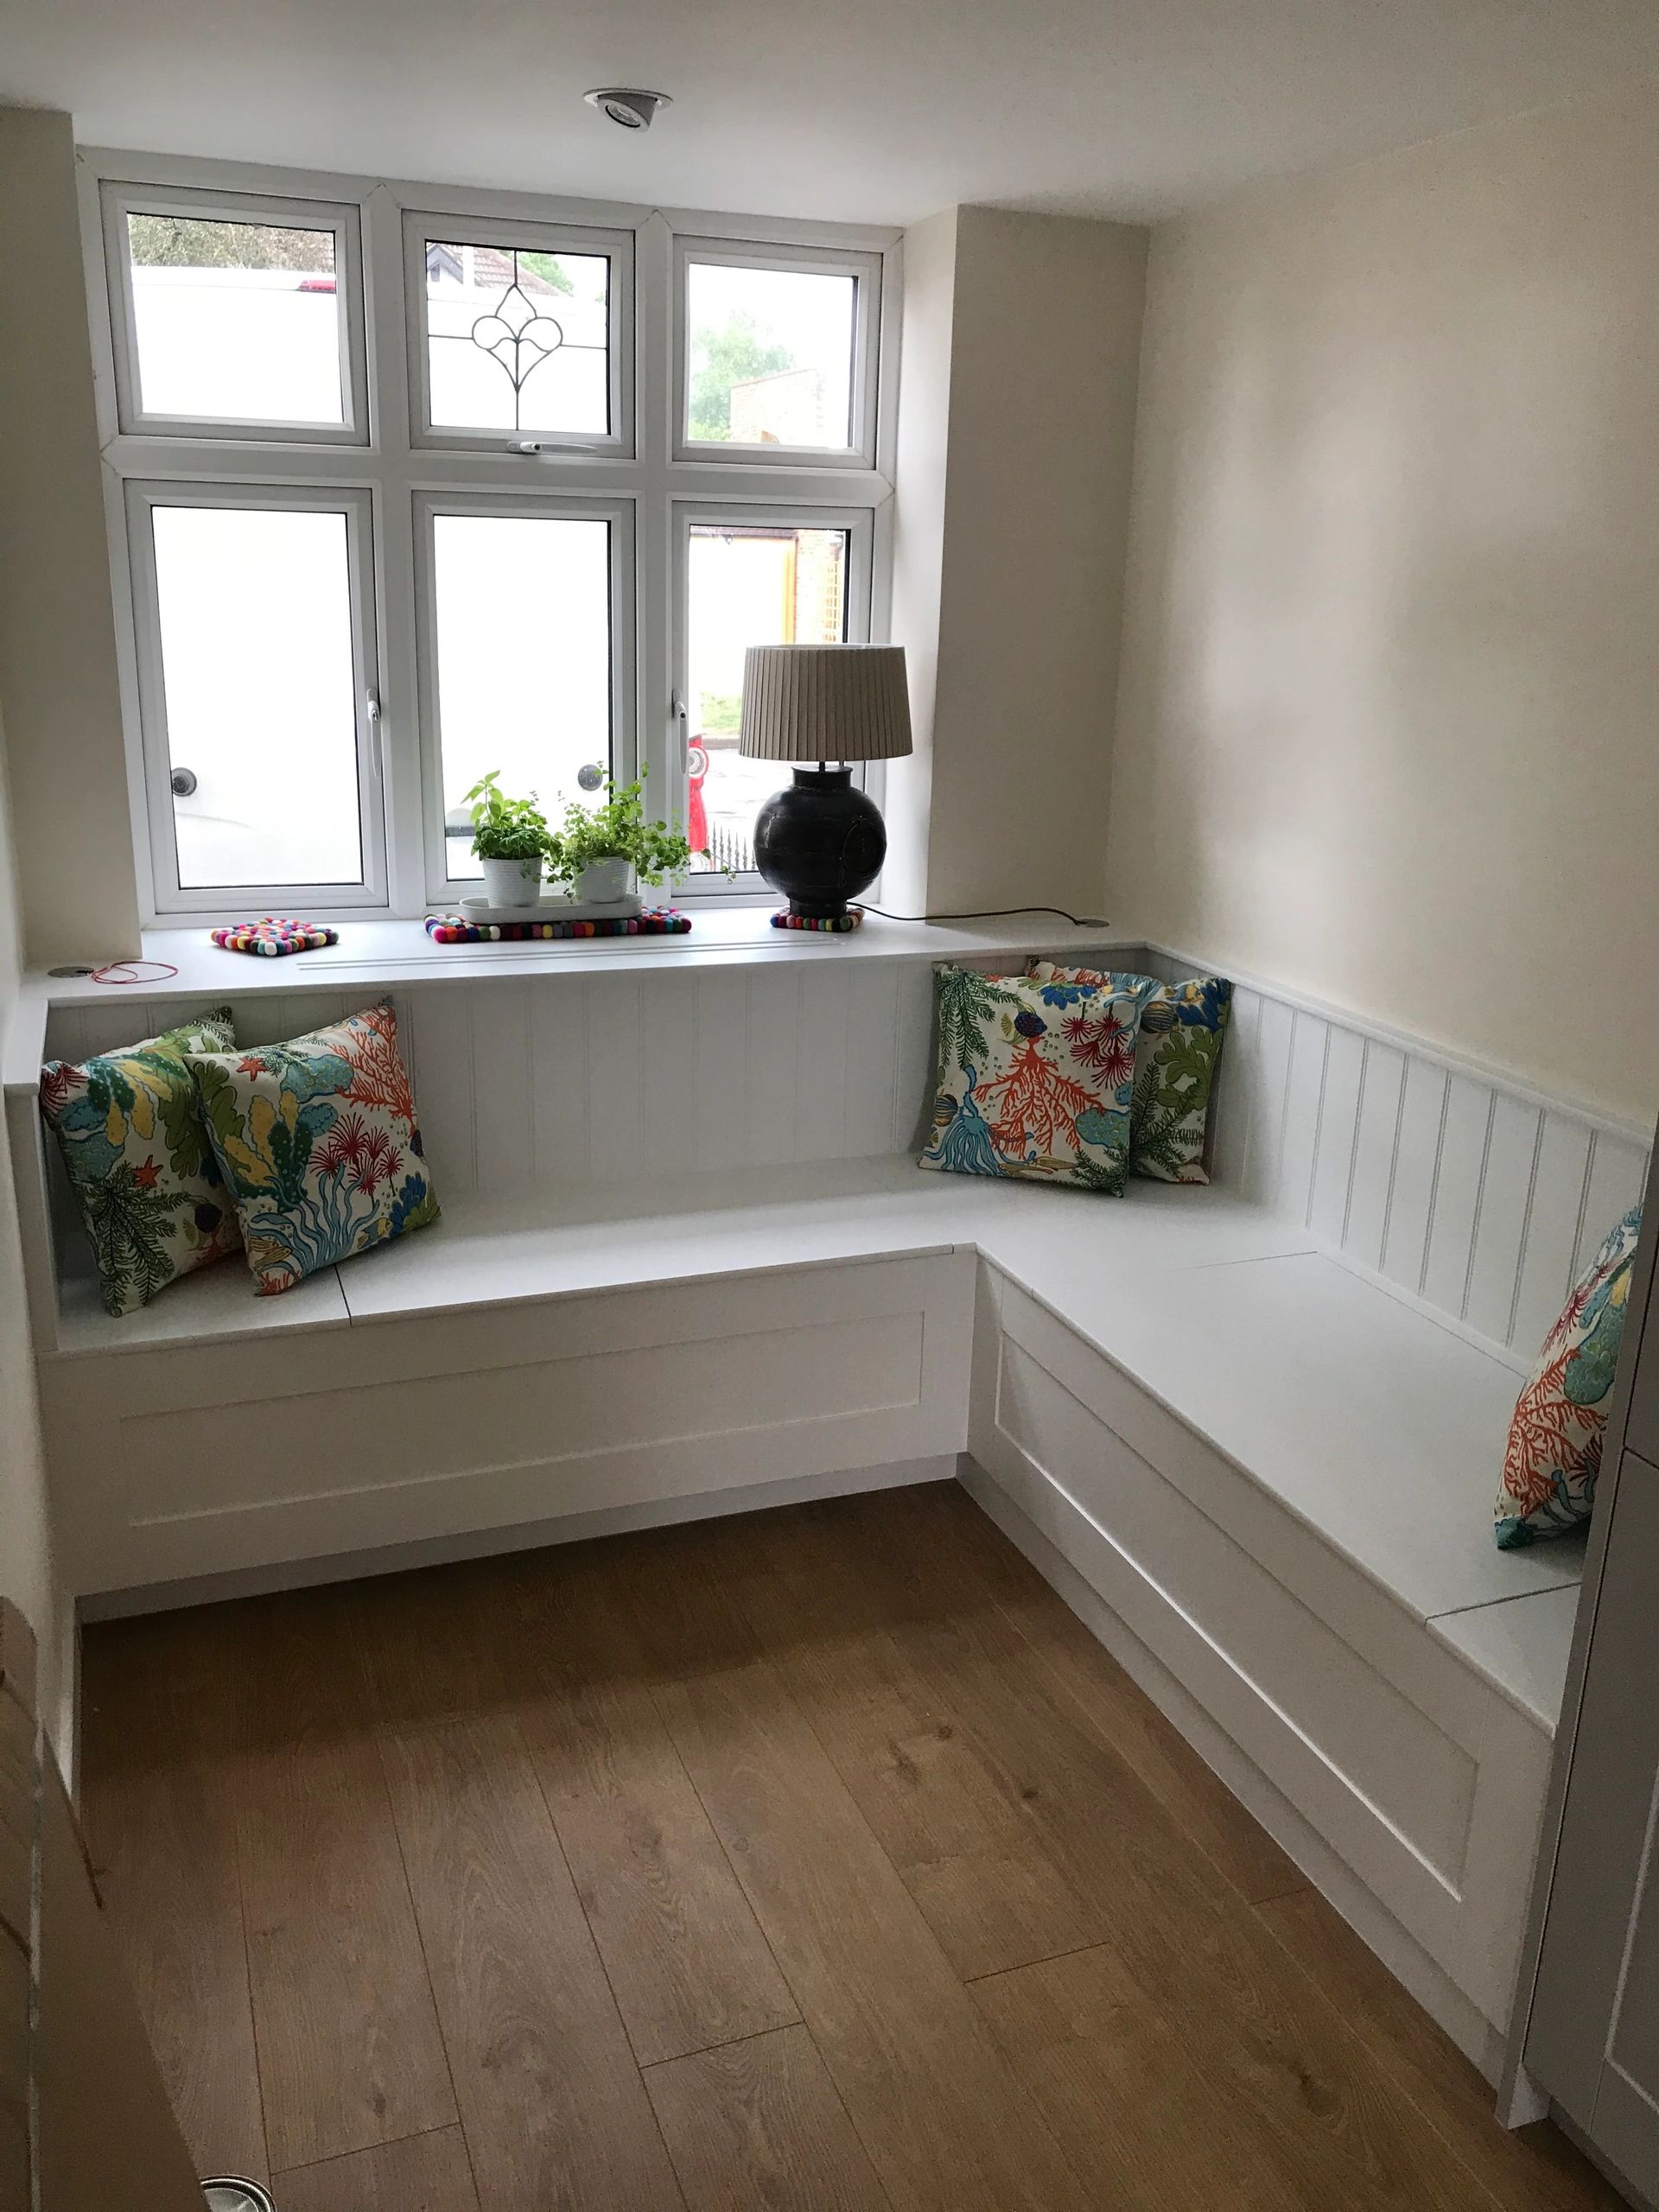 Window seat and radiator cover with storage.